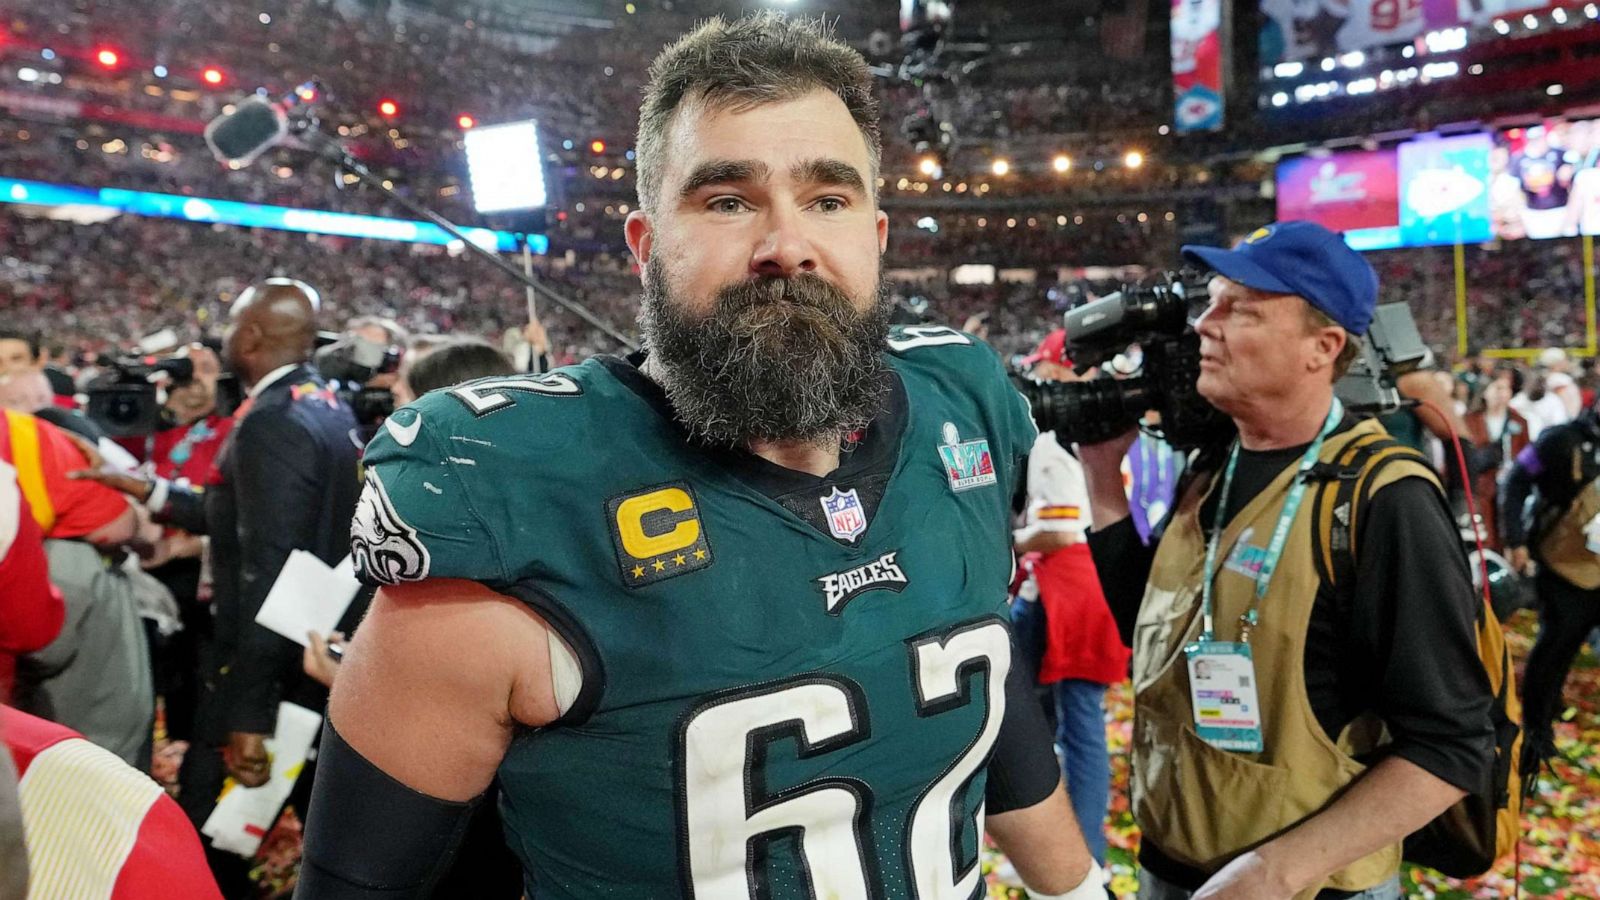 PHOTOS: Jason Kelce Got Married in Philly This Weekend